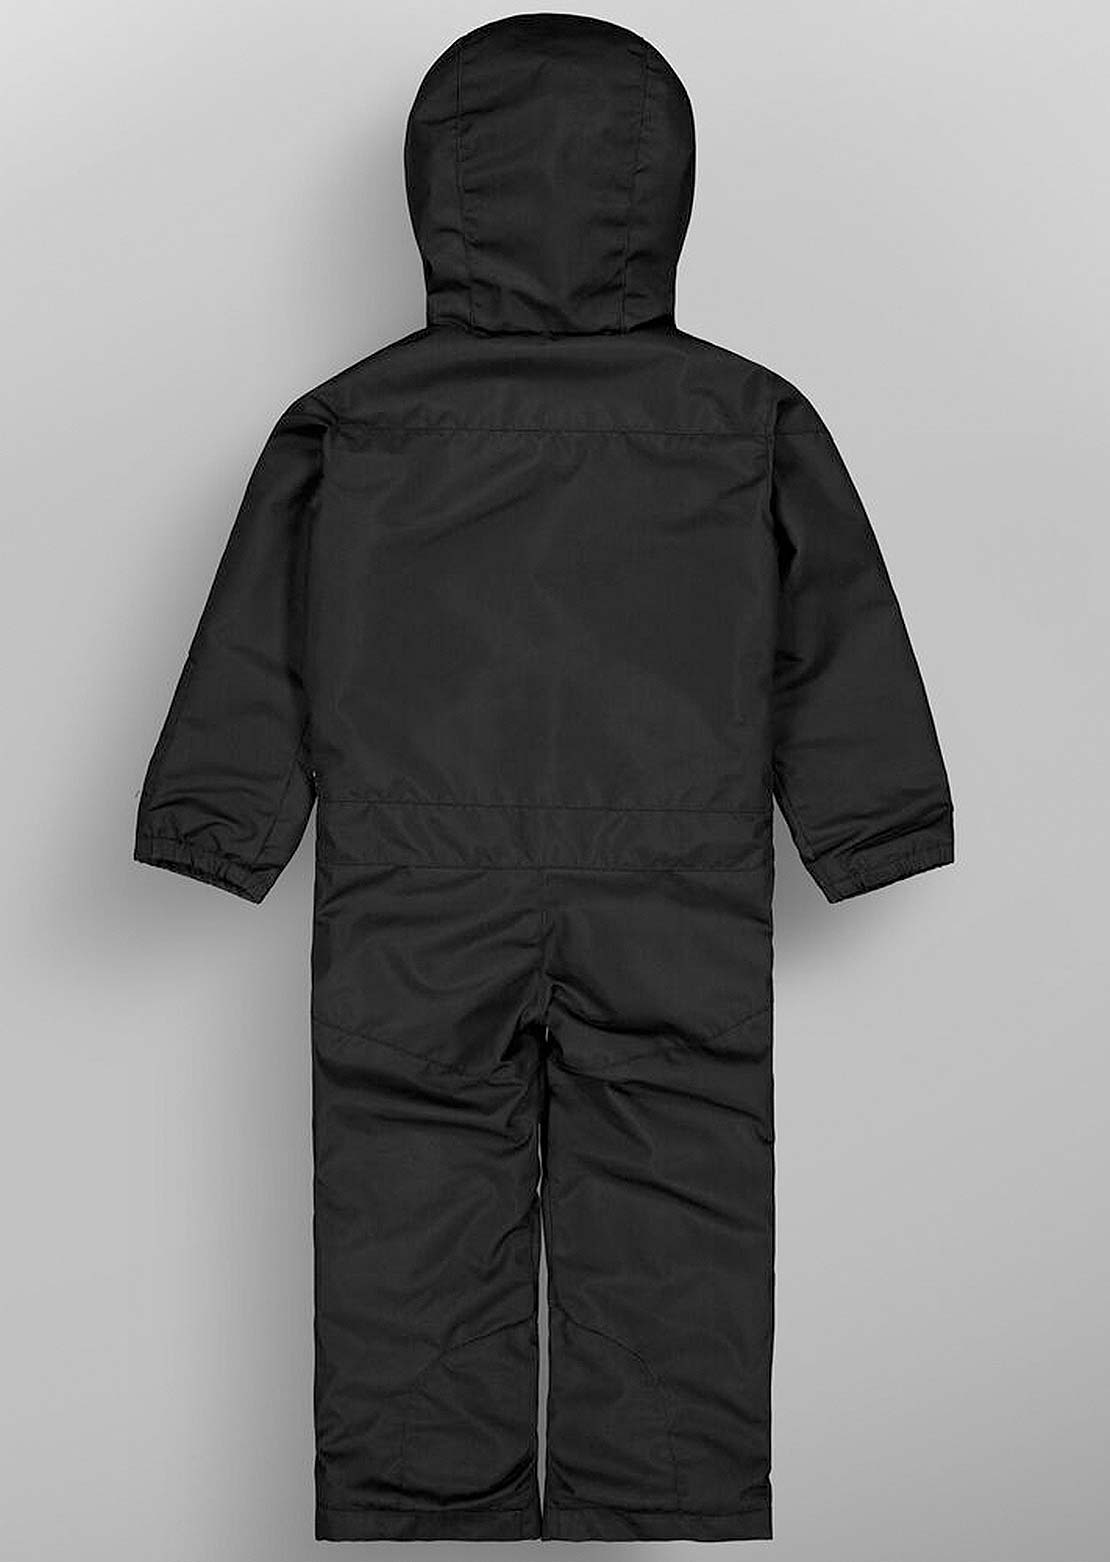 Picture Toddler Snowy Suit One Piece Black